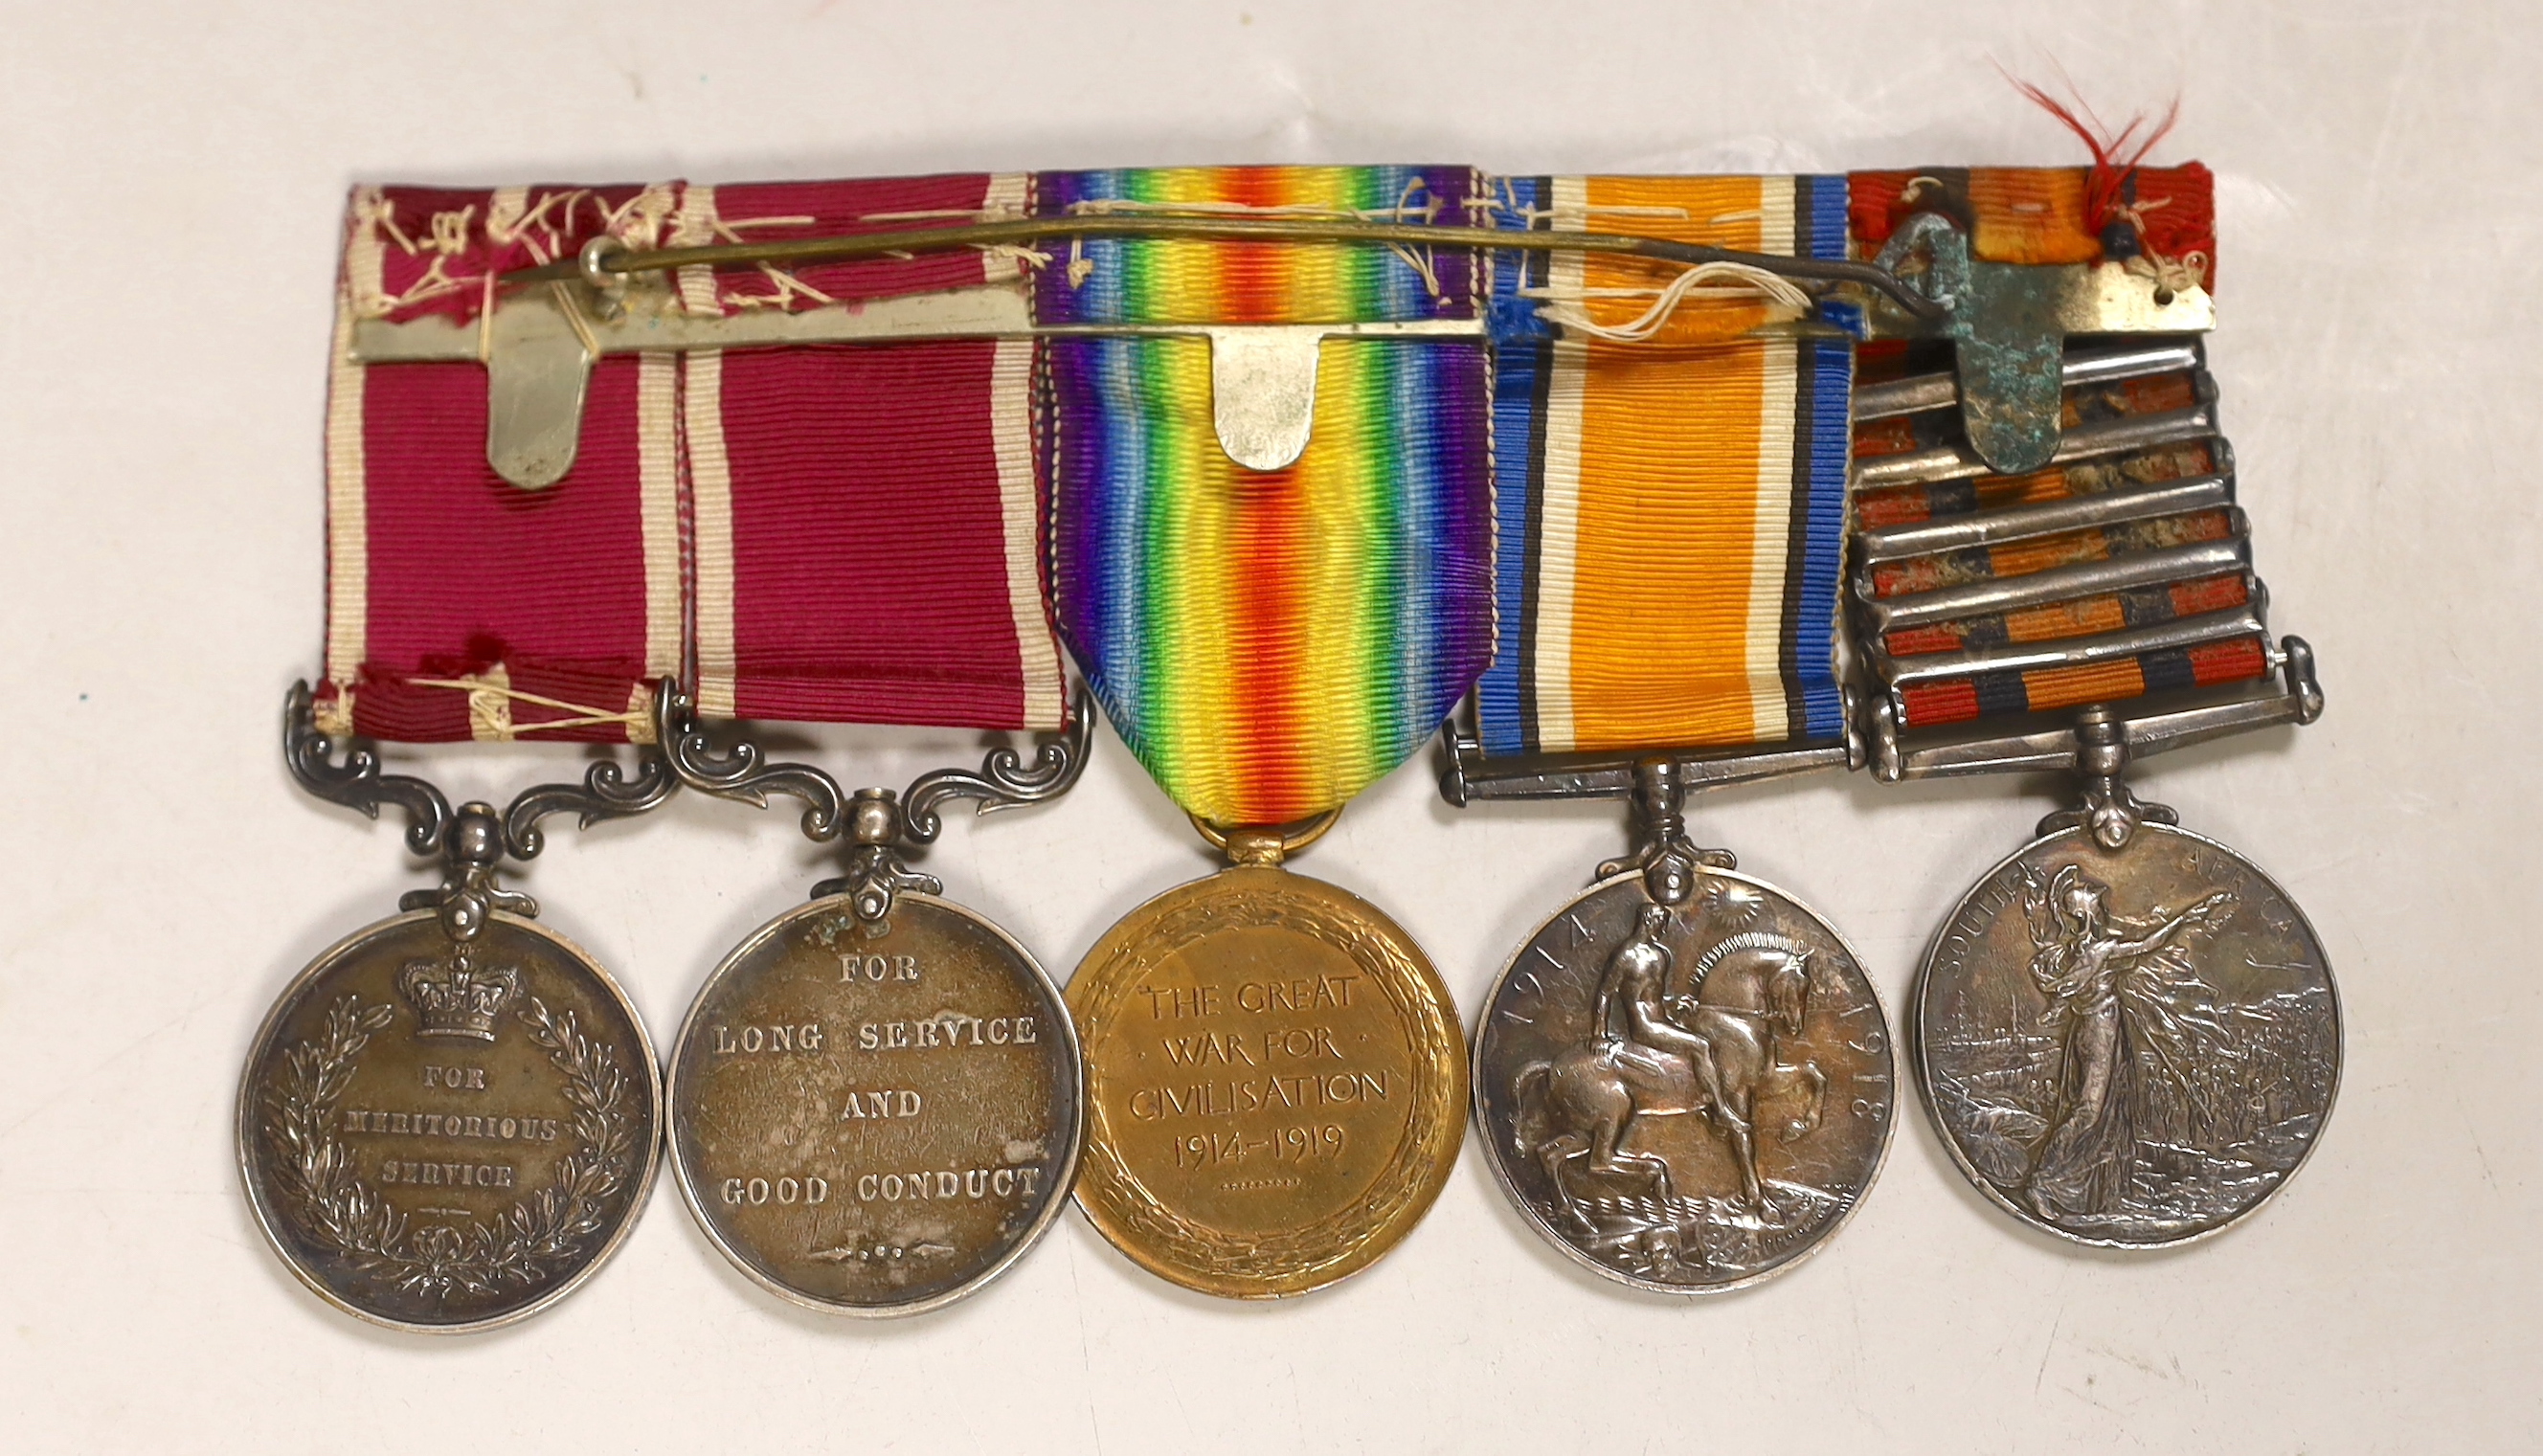 A Queen’s South Africa medal and WWI and meritorious service group of 5 medals to Lieut. O. Preston, 2nd Dragoon Guards